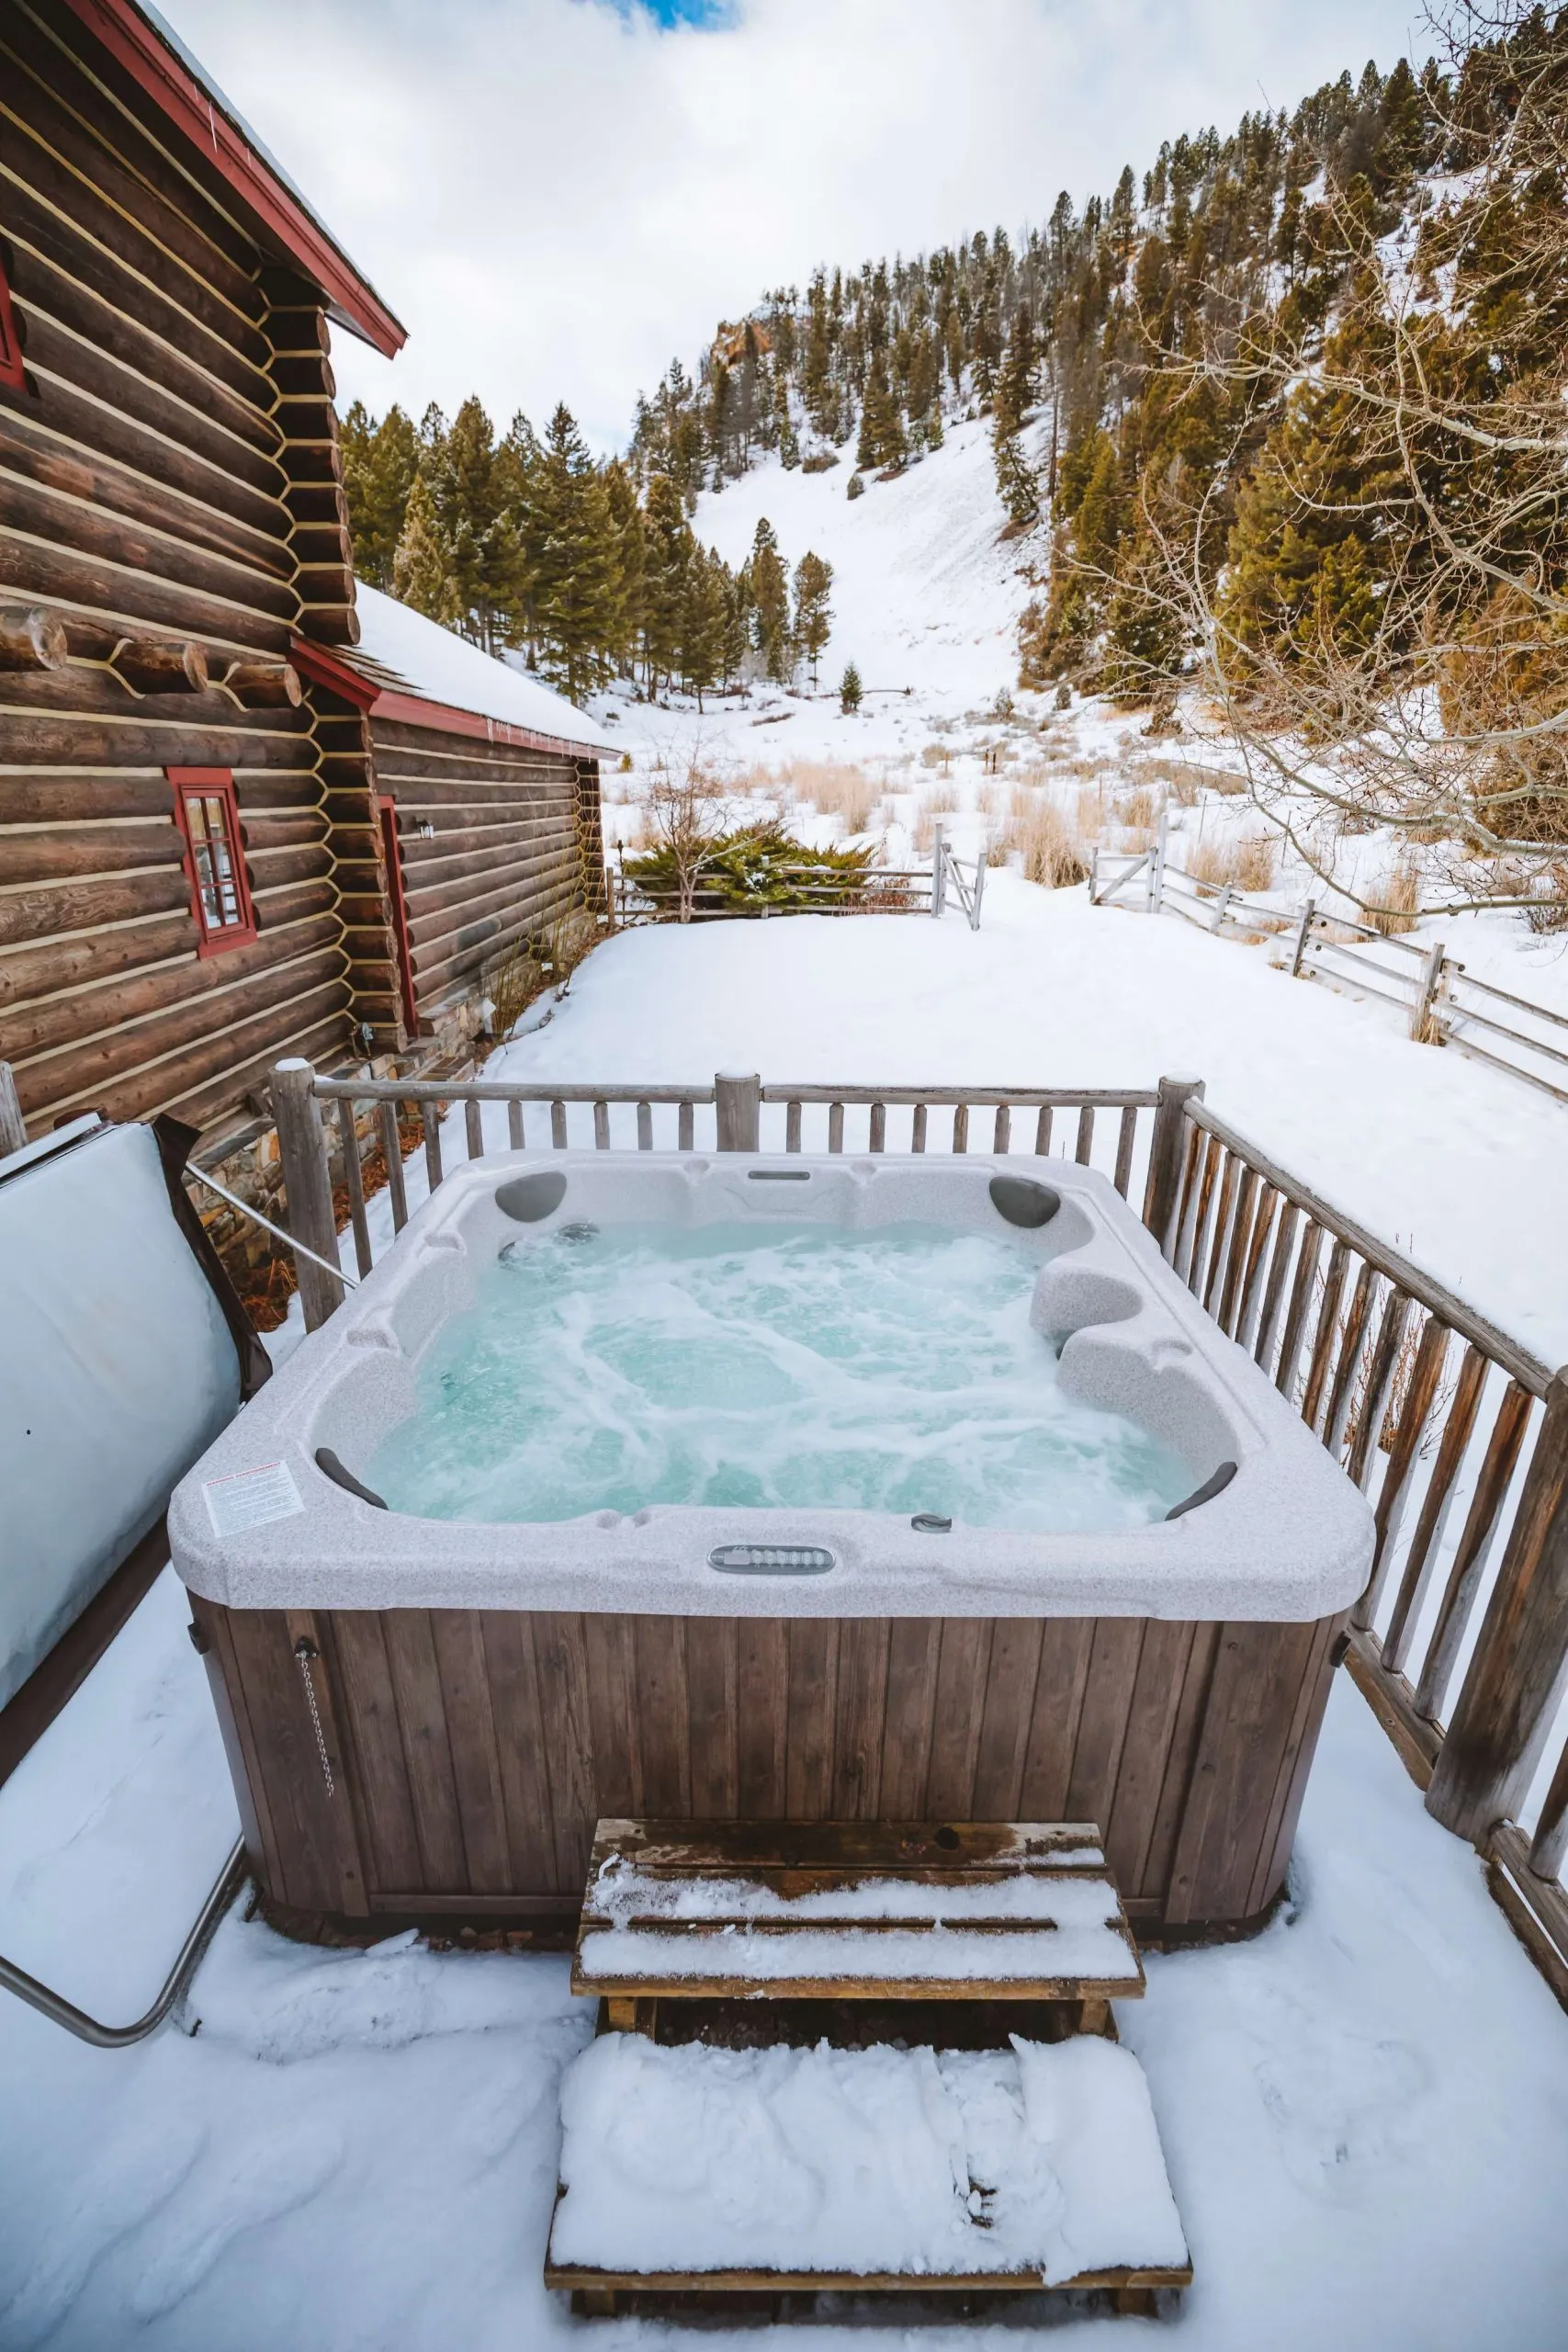 A running hot tub outside on a porch in the winter 